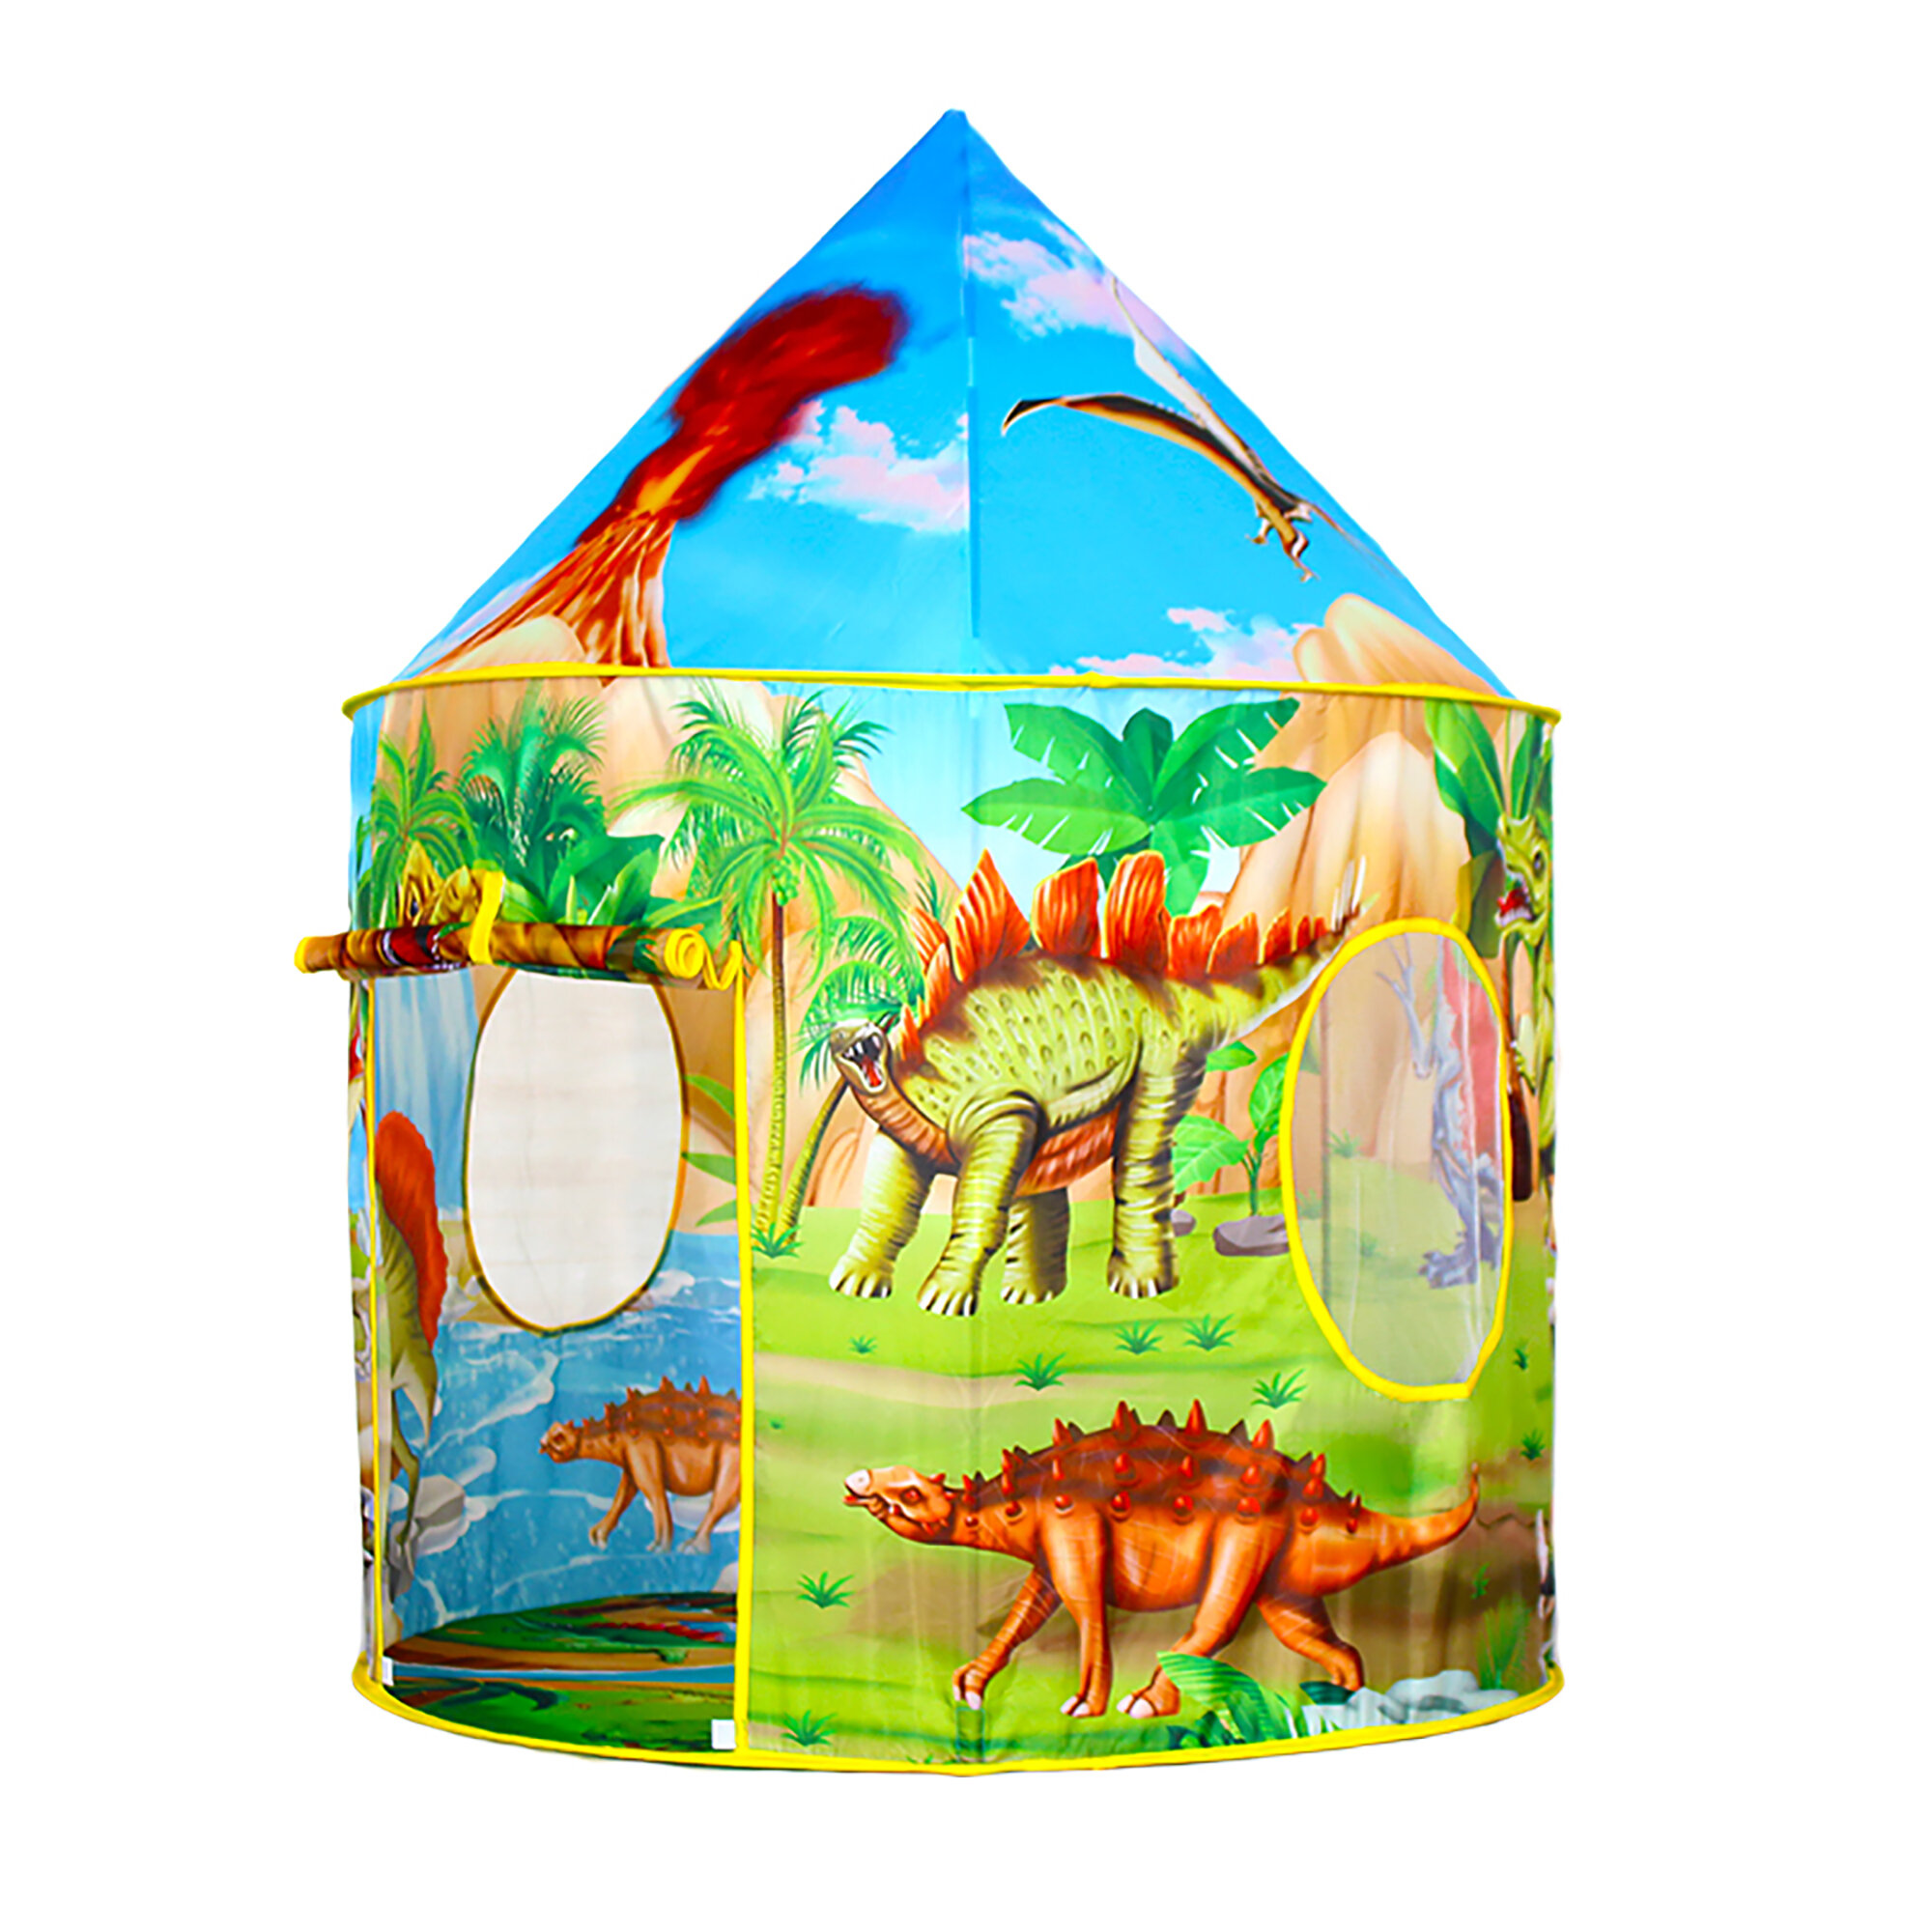 Dinosaur Play Tent for Kids Pop Up Kids Play Tent for Indoor and Outdoor Playhouse for Boy Girl Dinosaur Toys for Toddlers Gift for Babies Tent with Carry Bag for Birthday Green 